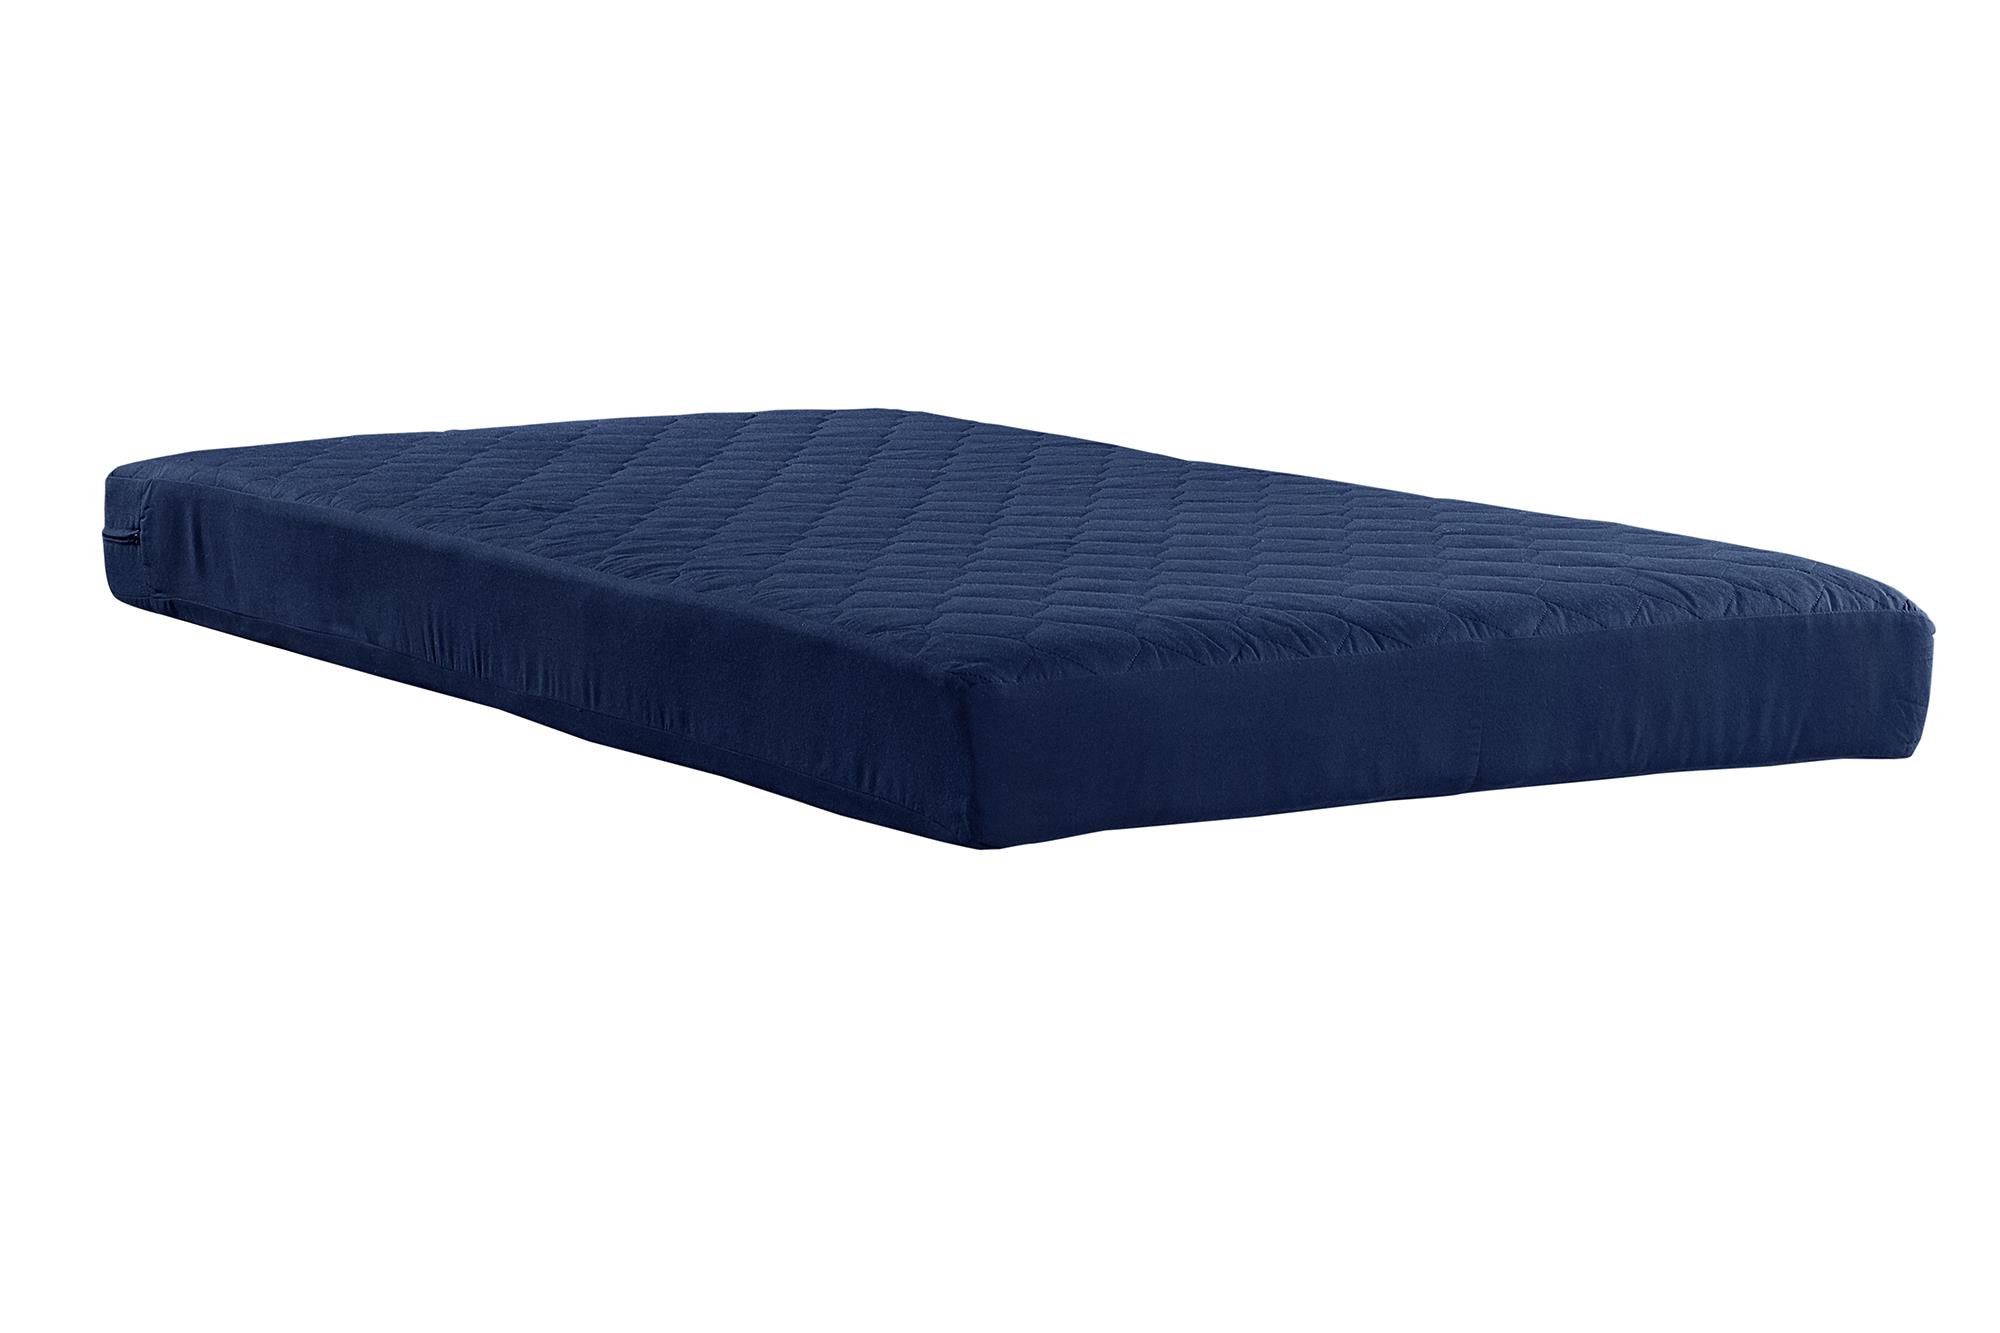 DHP Value 6 Inch Thermobonded Polyester Filled Quilted Top Bunk Bed Mattress, Twin, Navy - image 4 of 11